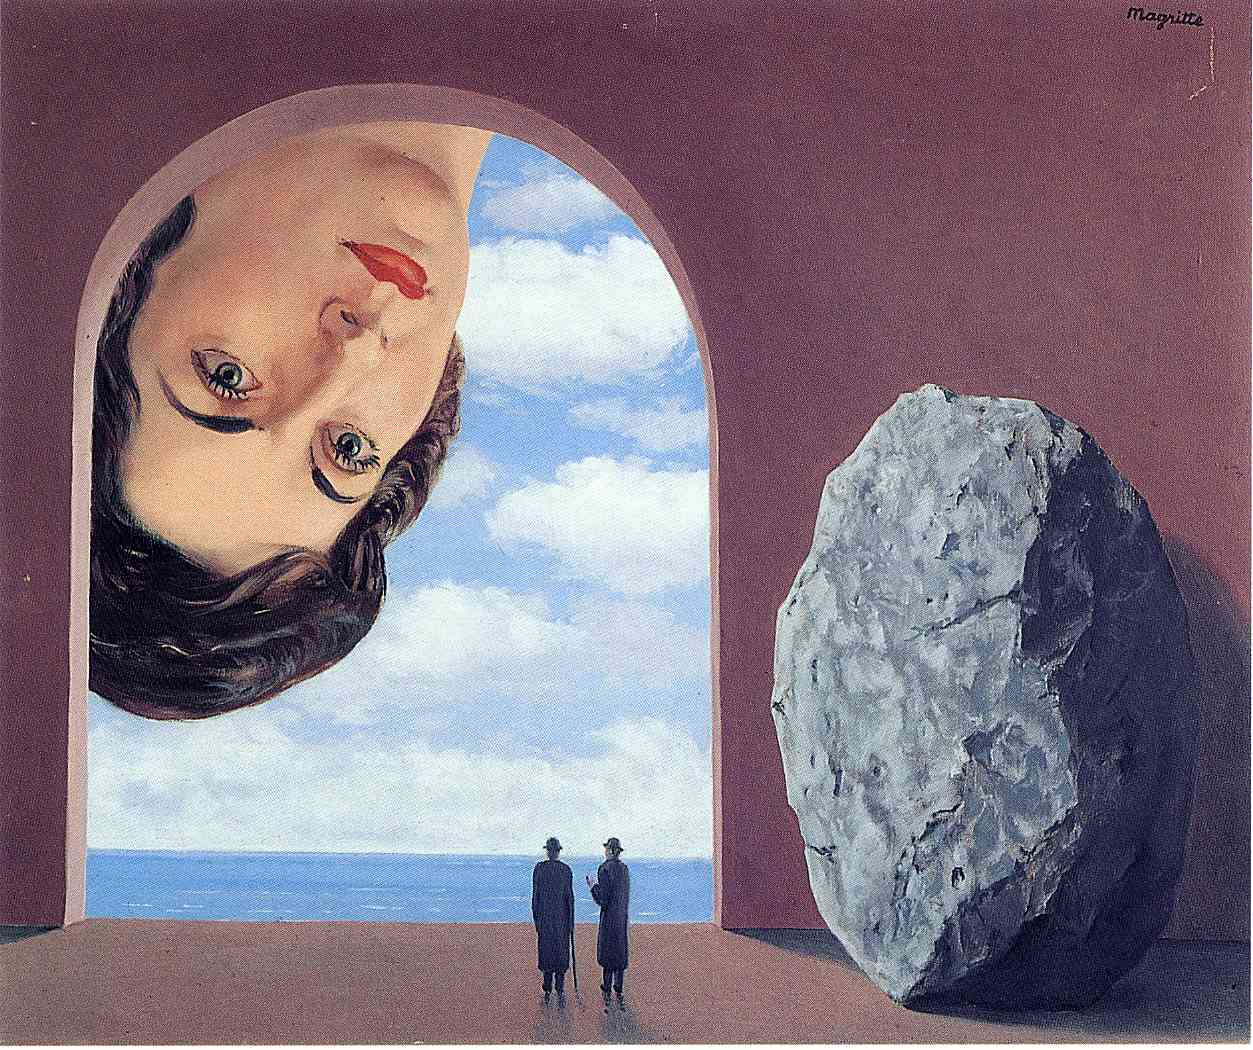 Magritte, Portrait of Stephy Langui